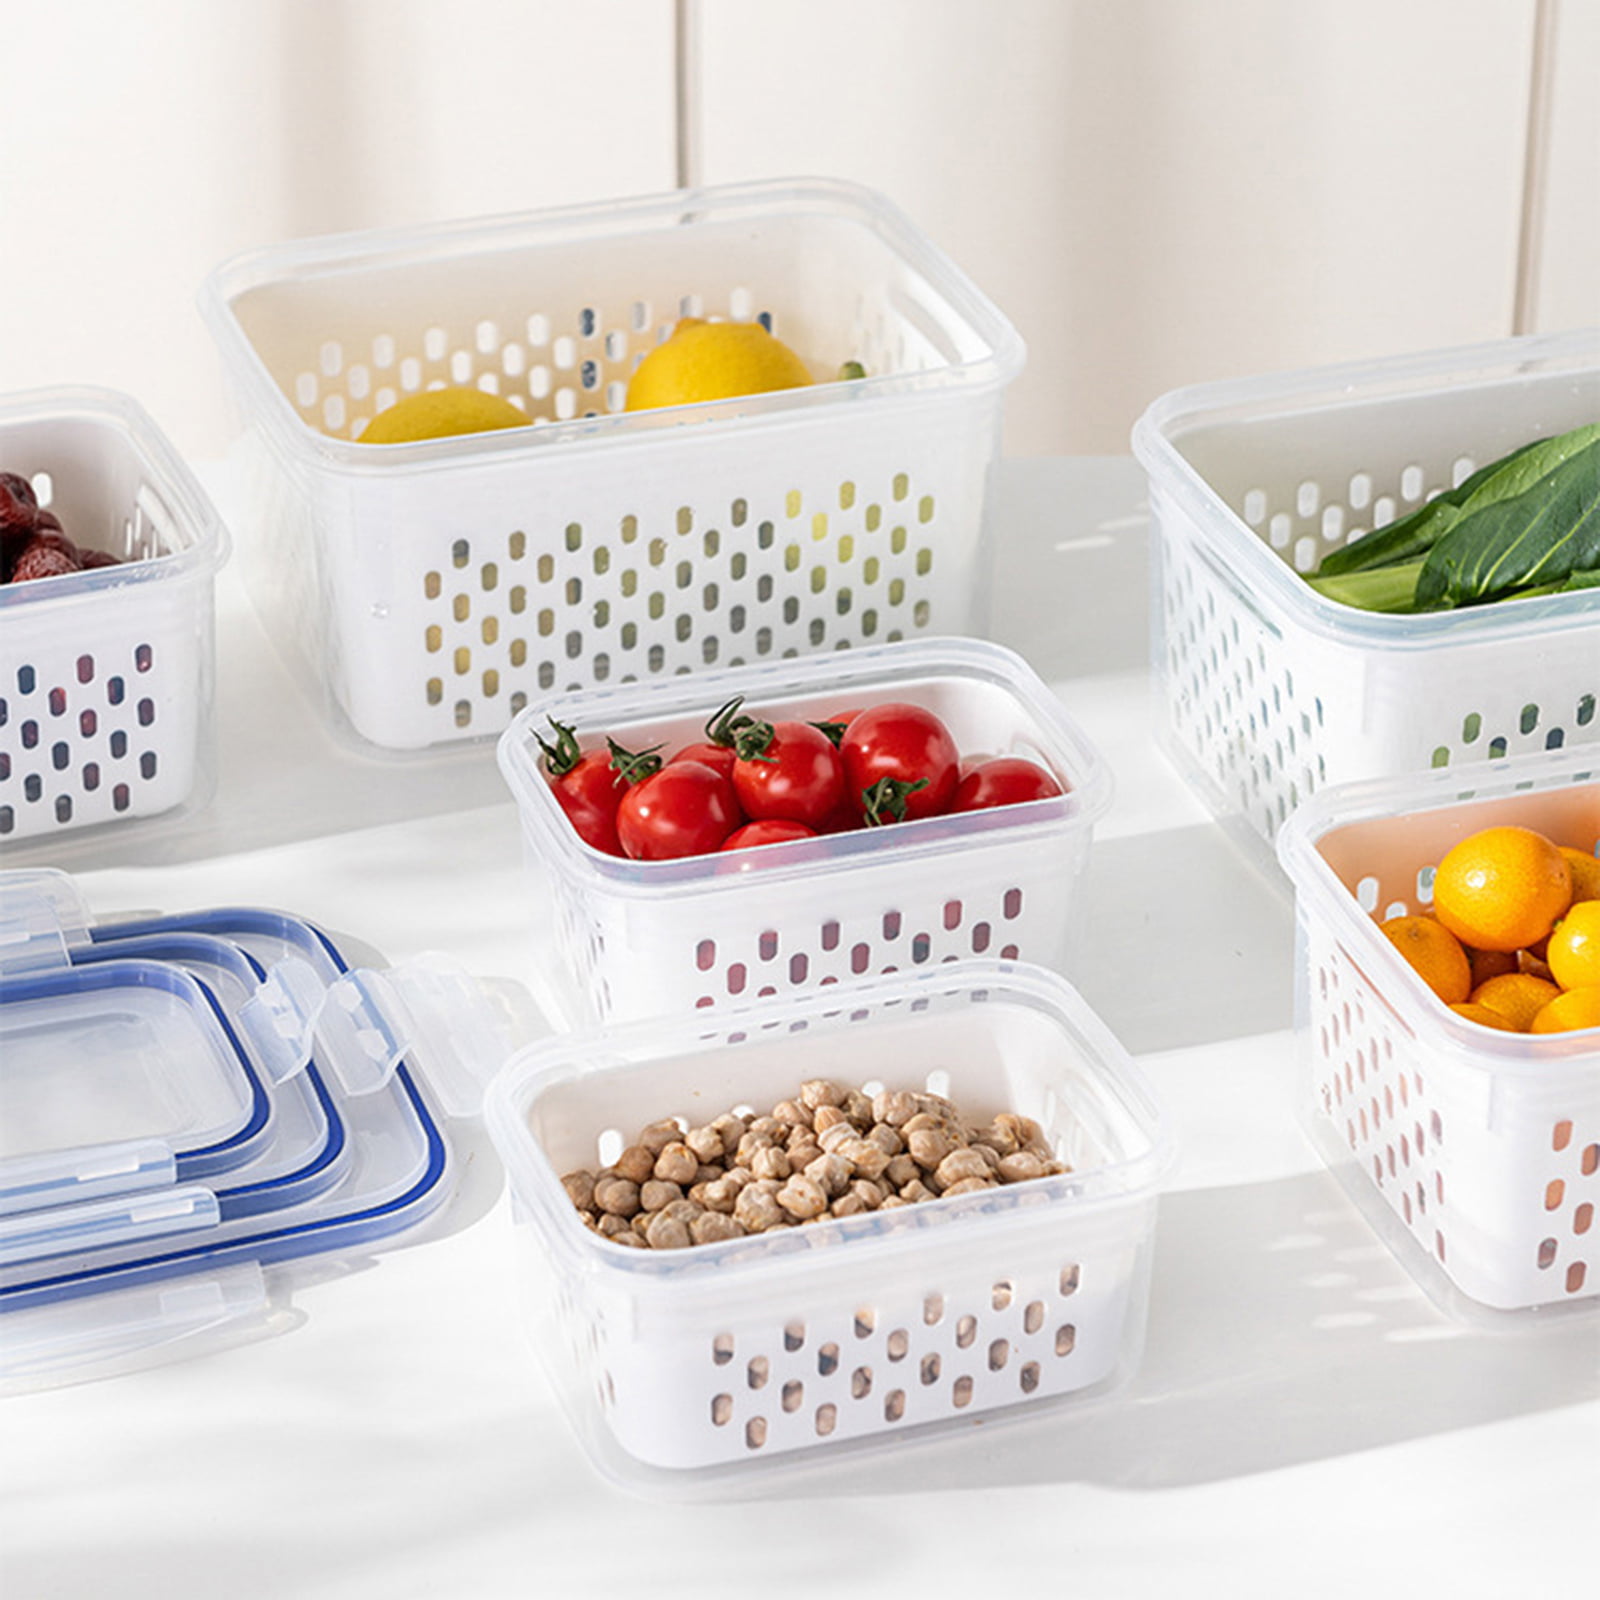 happyline Food Preservation Tray, Stackable BPA Free Plastic Food Storage Container with Elastic Reusable Locking Lid for Refrigerator and Freezer